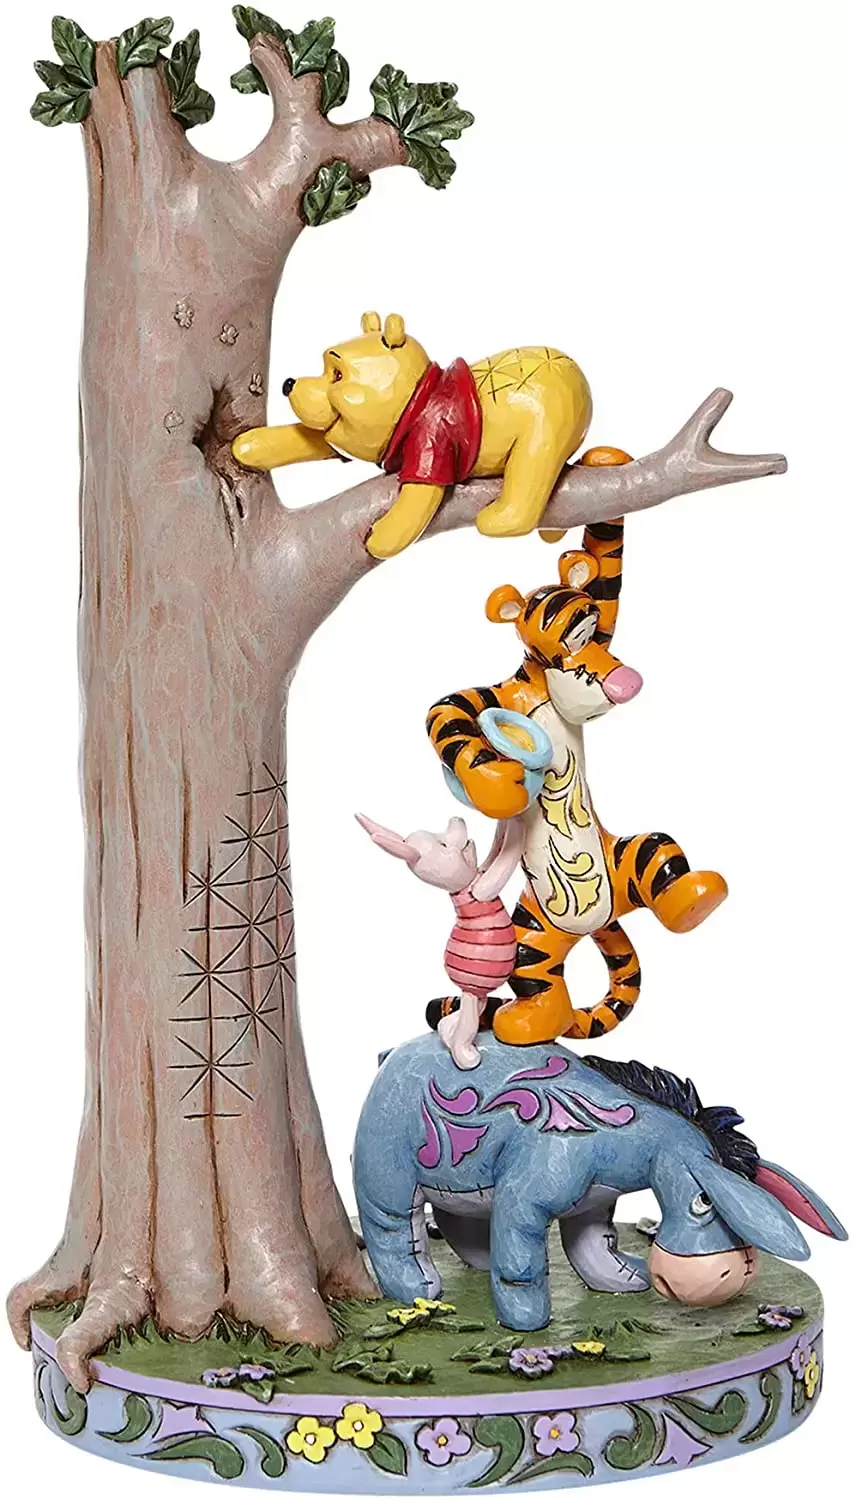 Disney Traditions by Jim Shore - Pooh Eeyore Tigger and Piglet